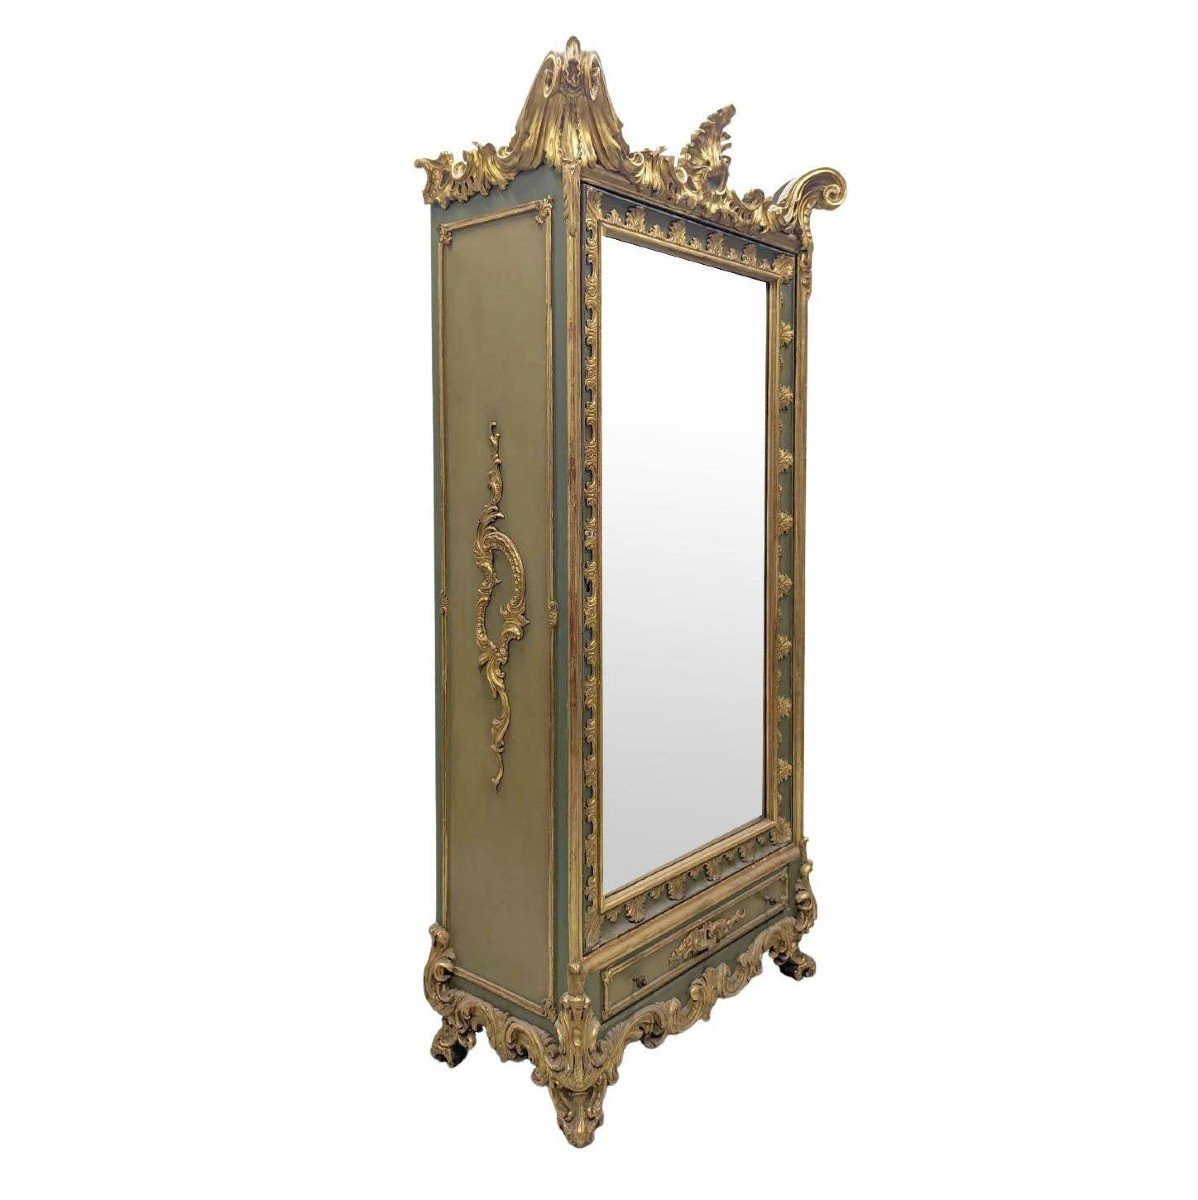 Pair Of Golden Lacquered Turinese Cabinets From The Beginning Of The Nineteenth Century.-photo-1